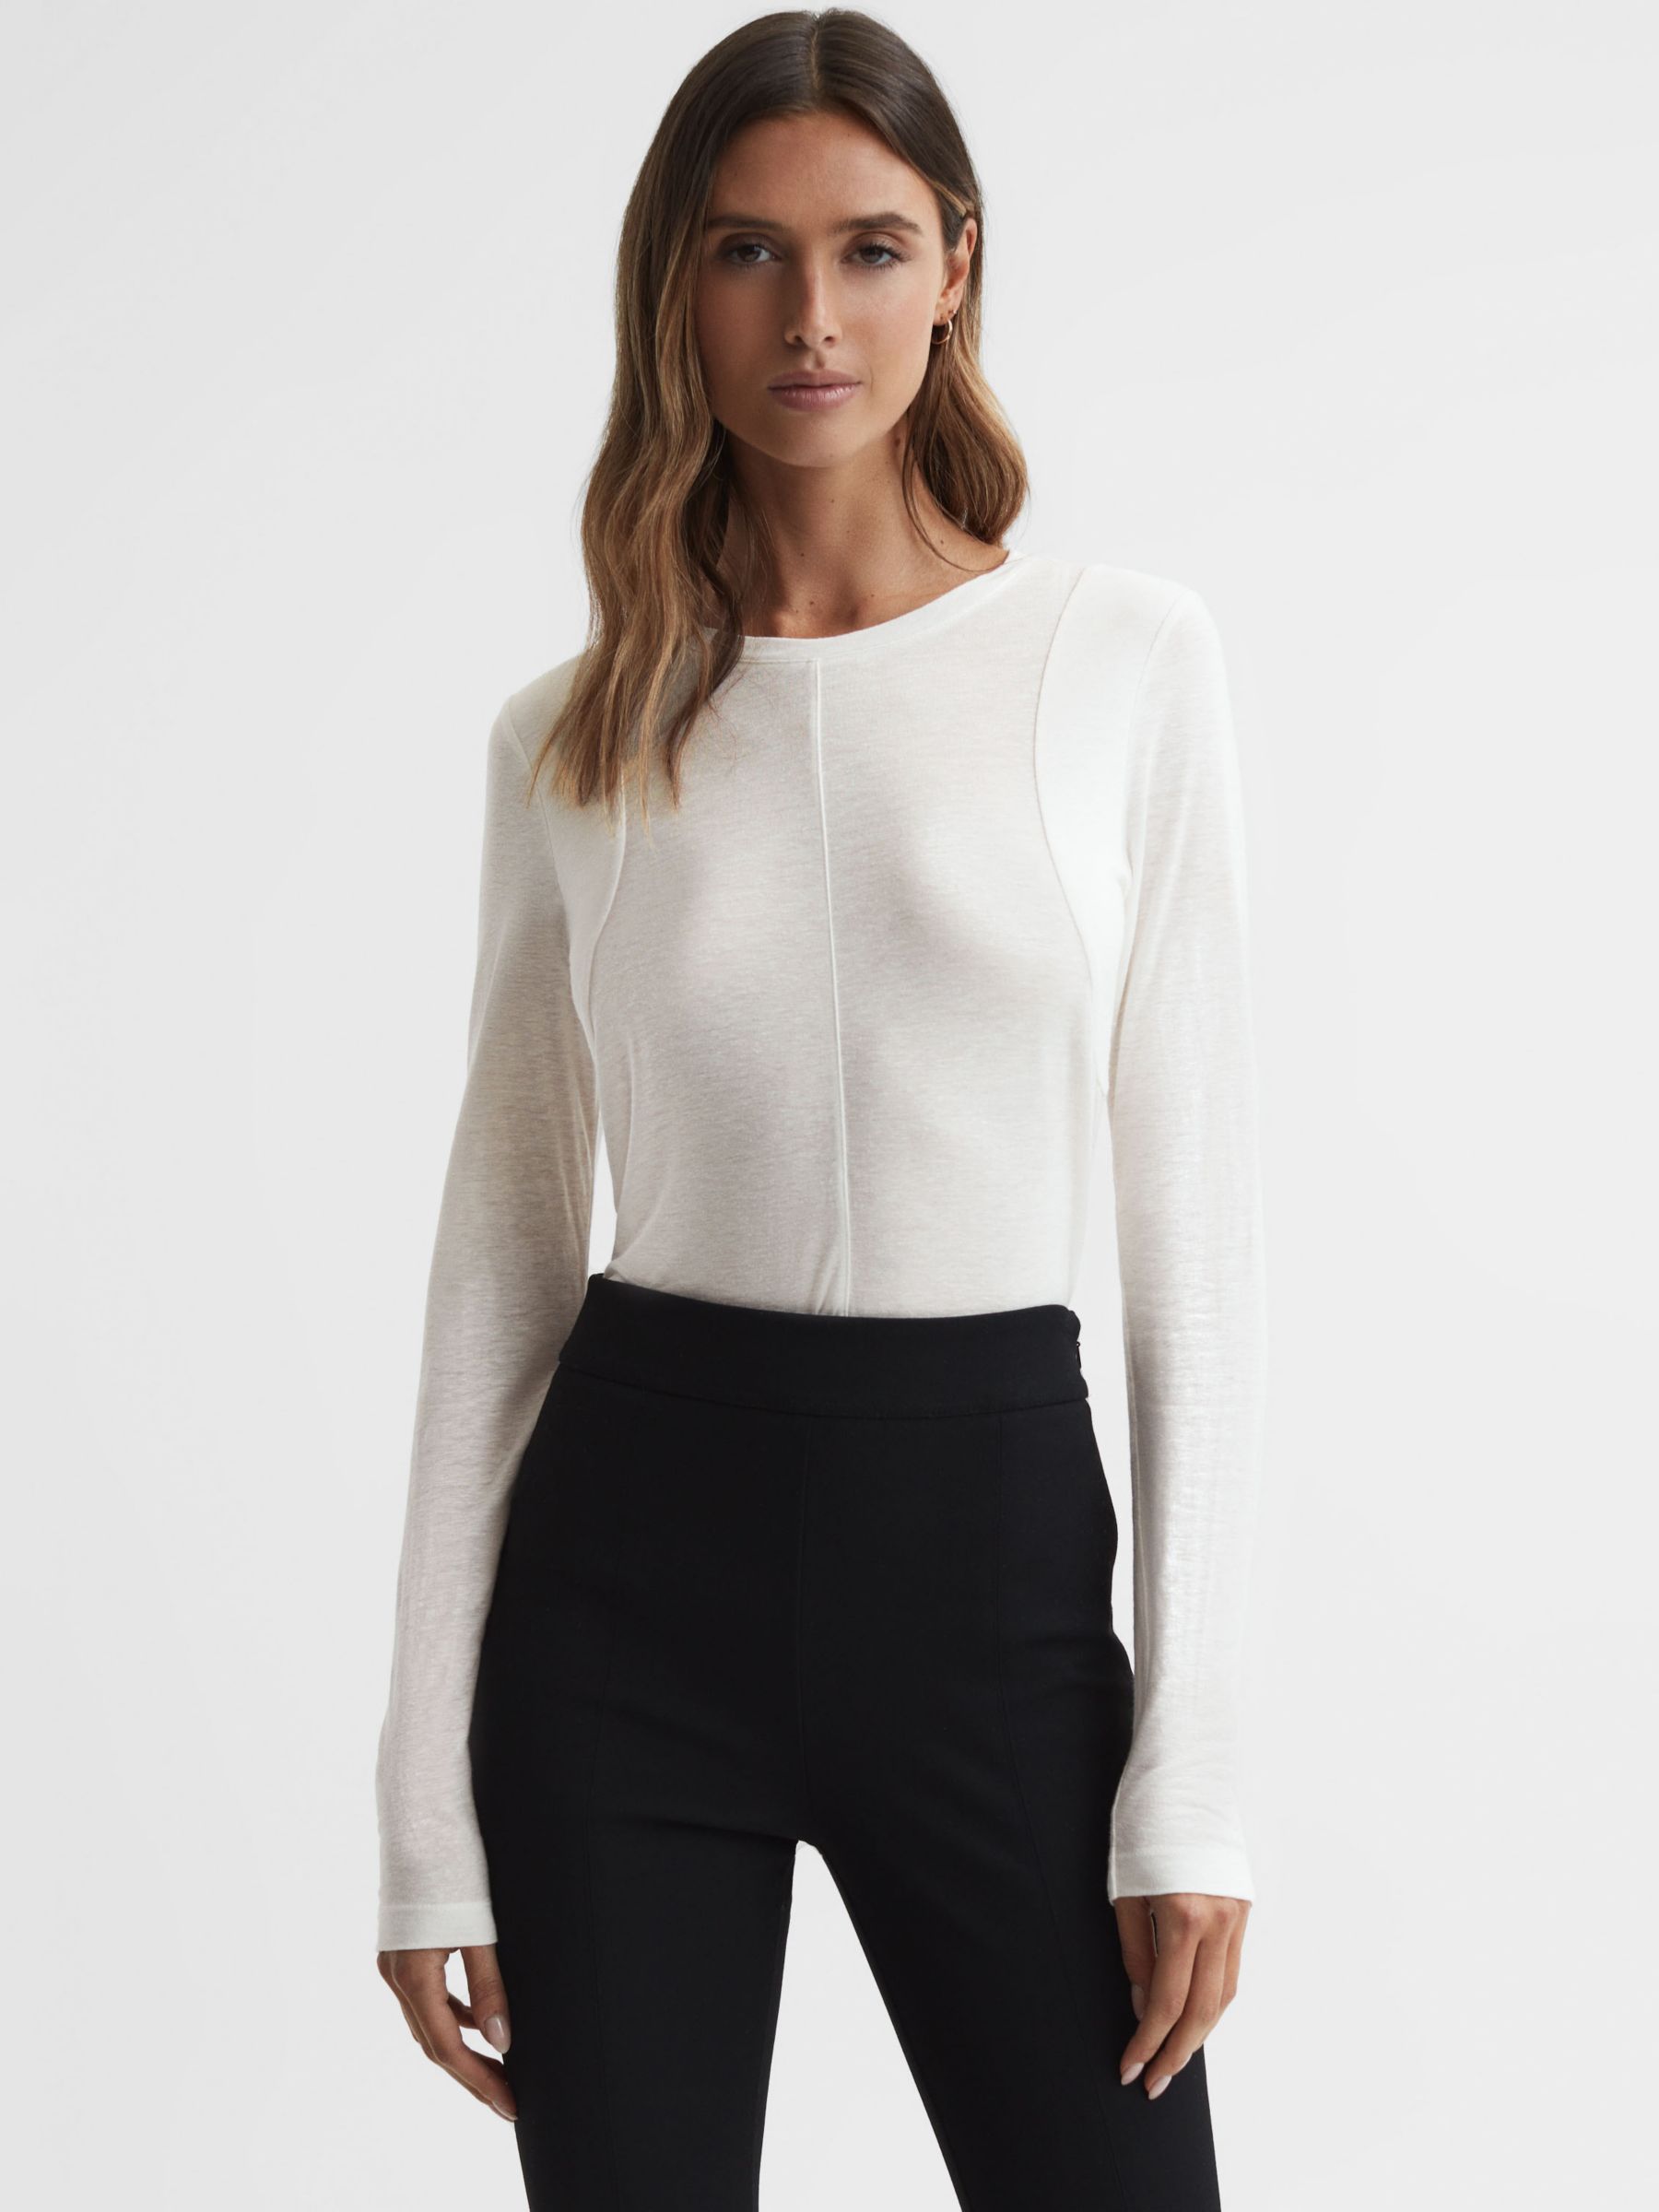 Reiss Mai Long Sleeve Stitch Detail Top, Ivory at John Lewis & Partners